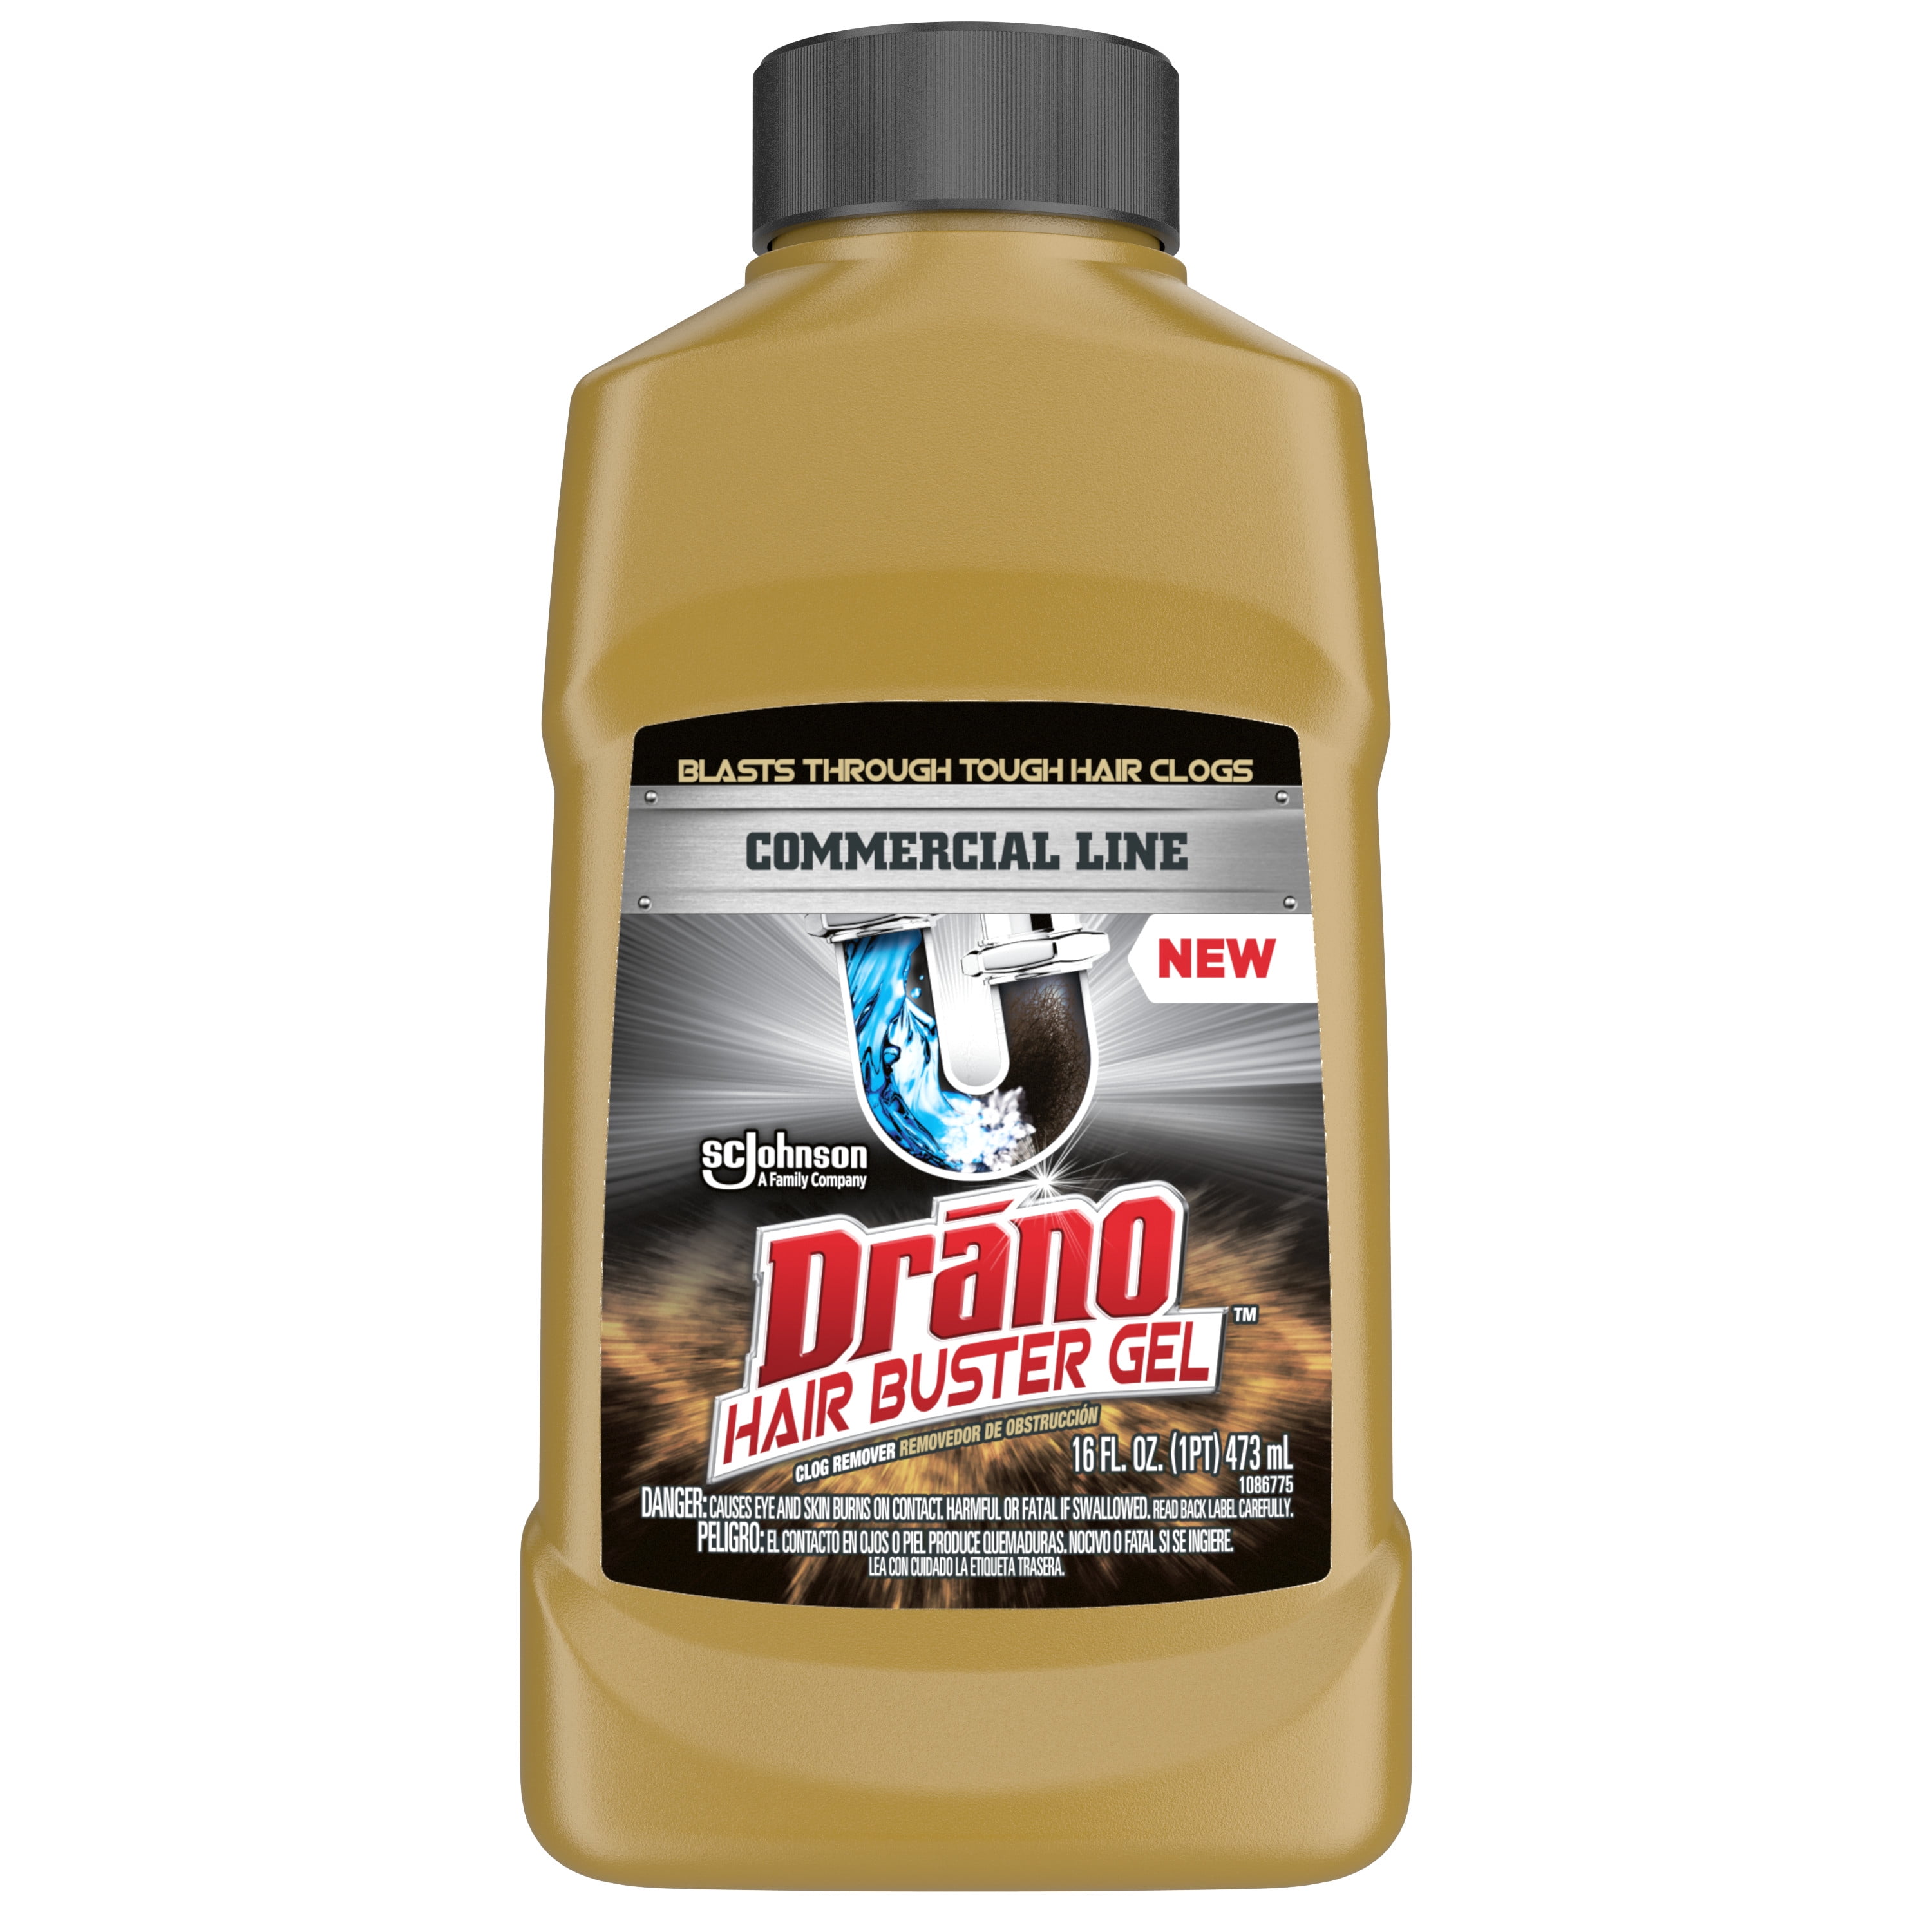 Drano Hair Buster Gel Commercial Line, Bathtub Clog Remover